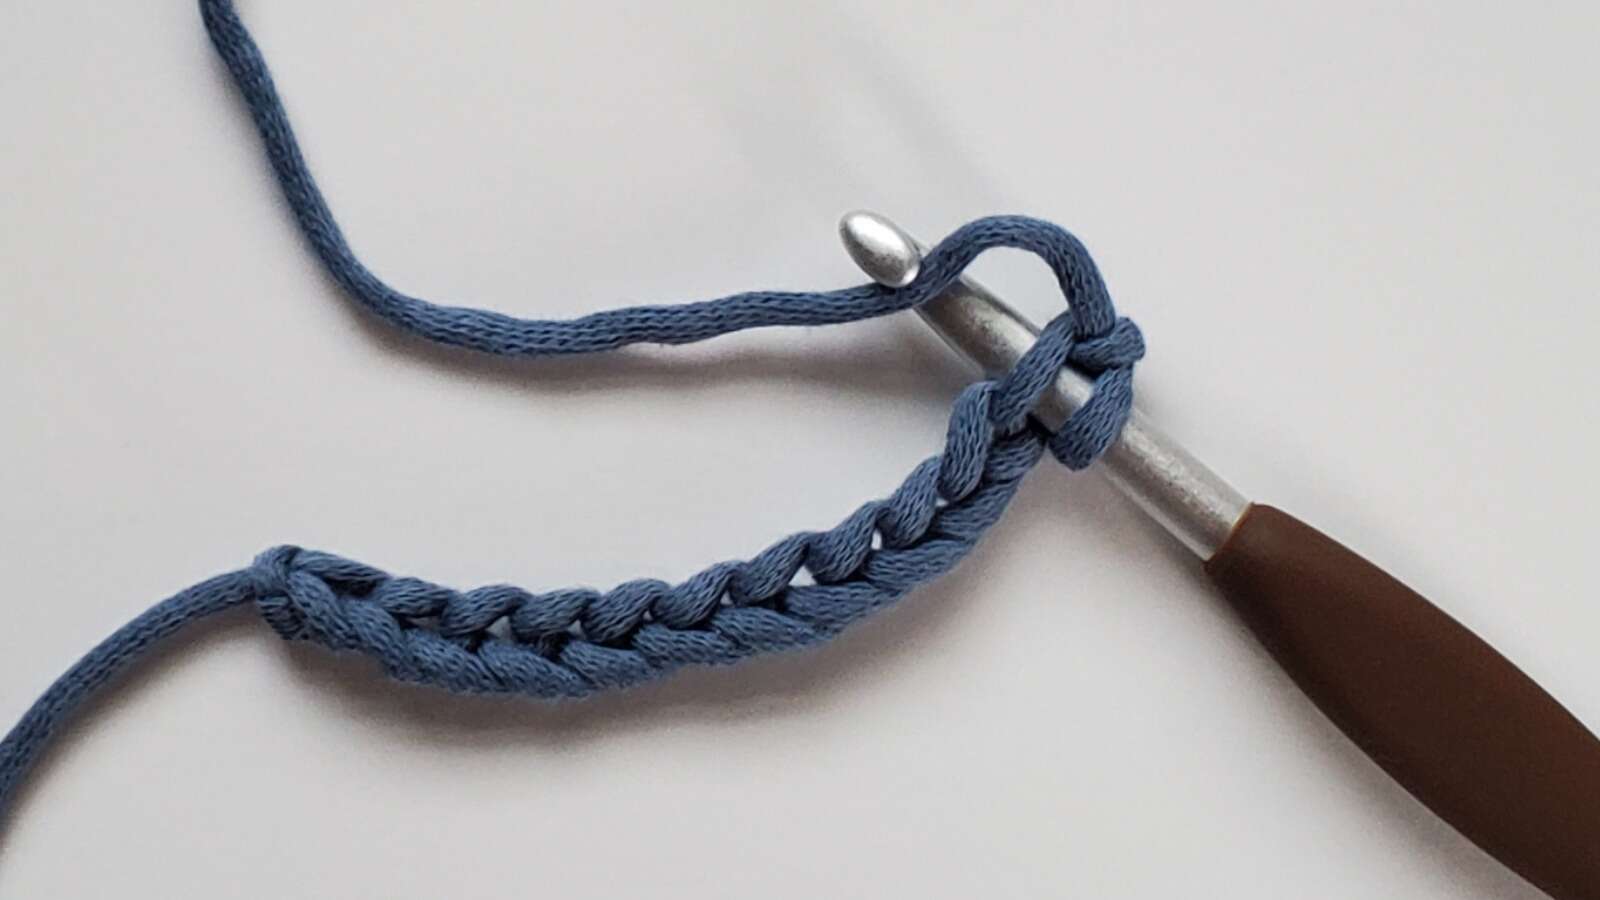 Linked half double crochet step 2, inserting hook into 2nd chain from hook and yarn over